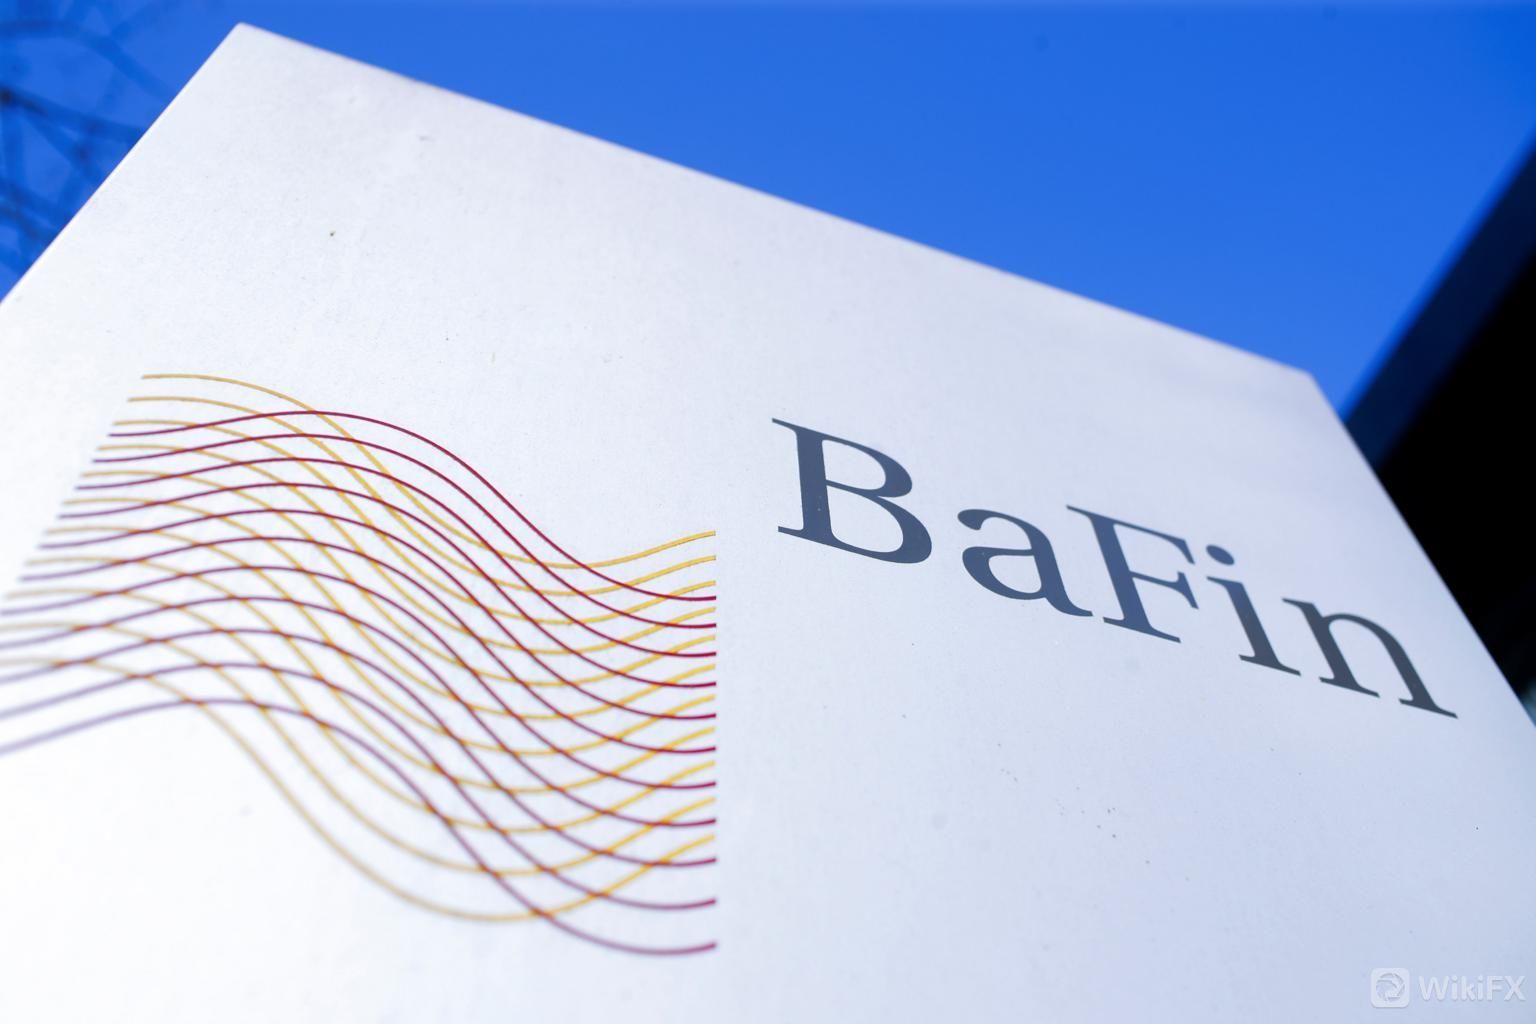 BaFin prohibits BIIC KREDIT from conducting unauthorized lending business and orders immediate liquidation